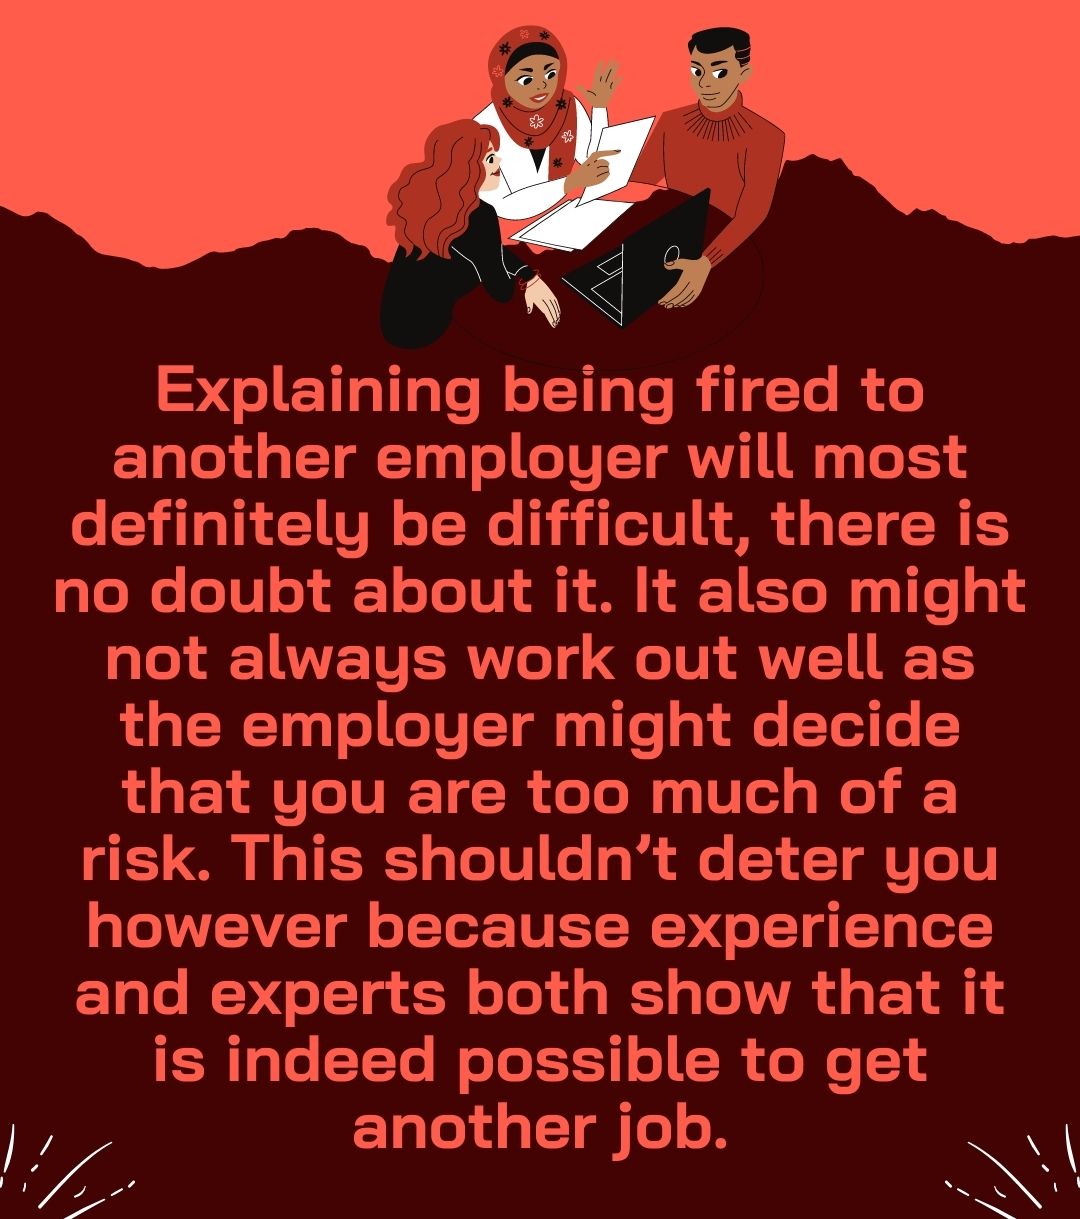 Explaining being fired to another employer will most definitely be difficult, there is no doubt about it. It also might not always work out well as the employer might decide that you are too much of a risk. This shouldn’t deter you however because experience and experts both show that it is indeed possible to get another job.